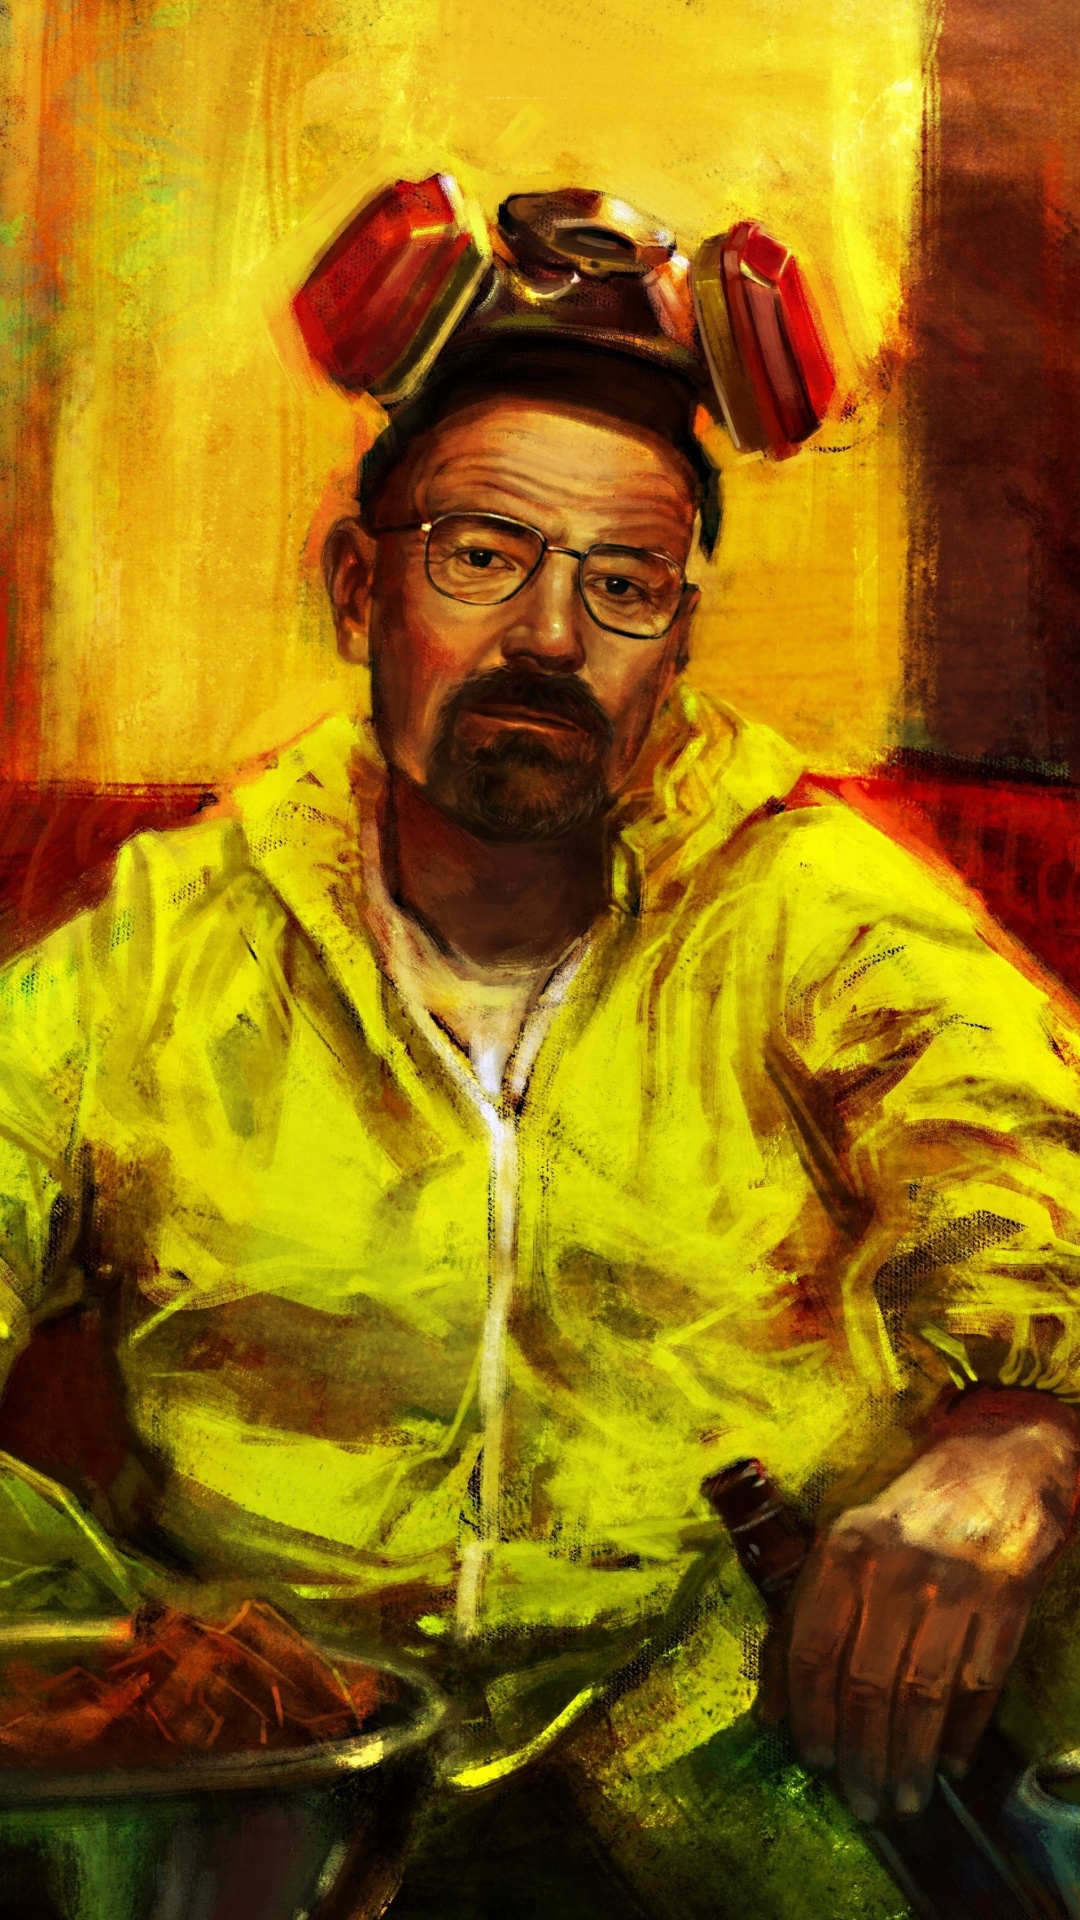 Breaking Bad with Walter White wallpaper 1080x1920